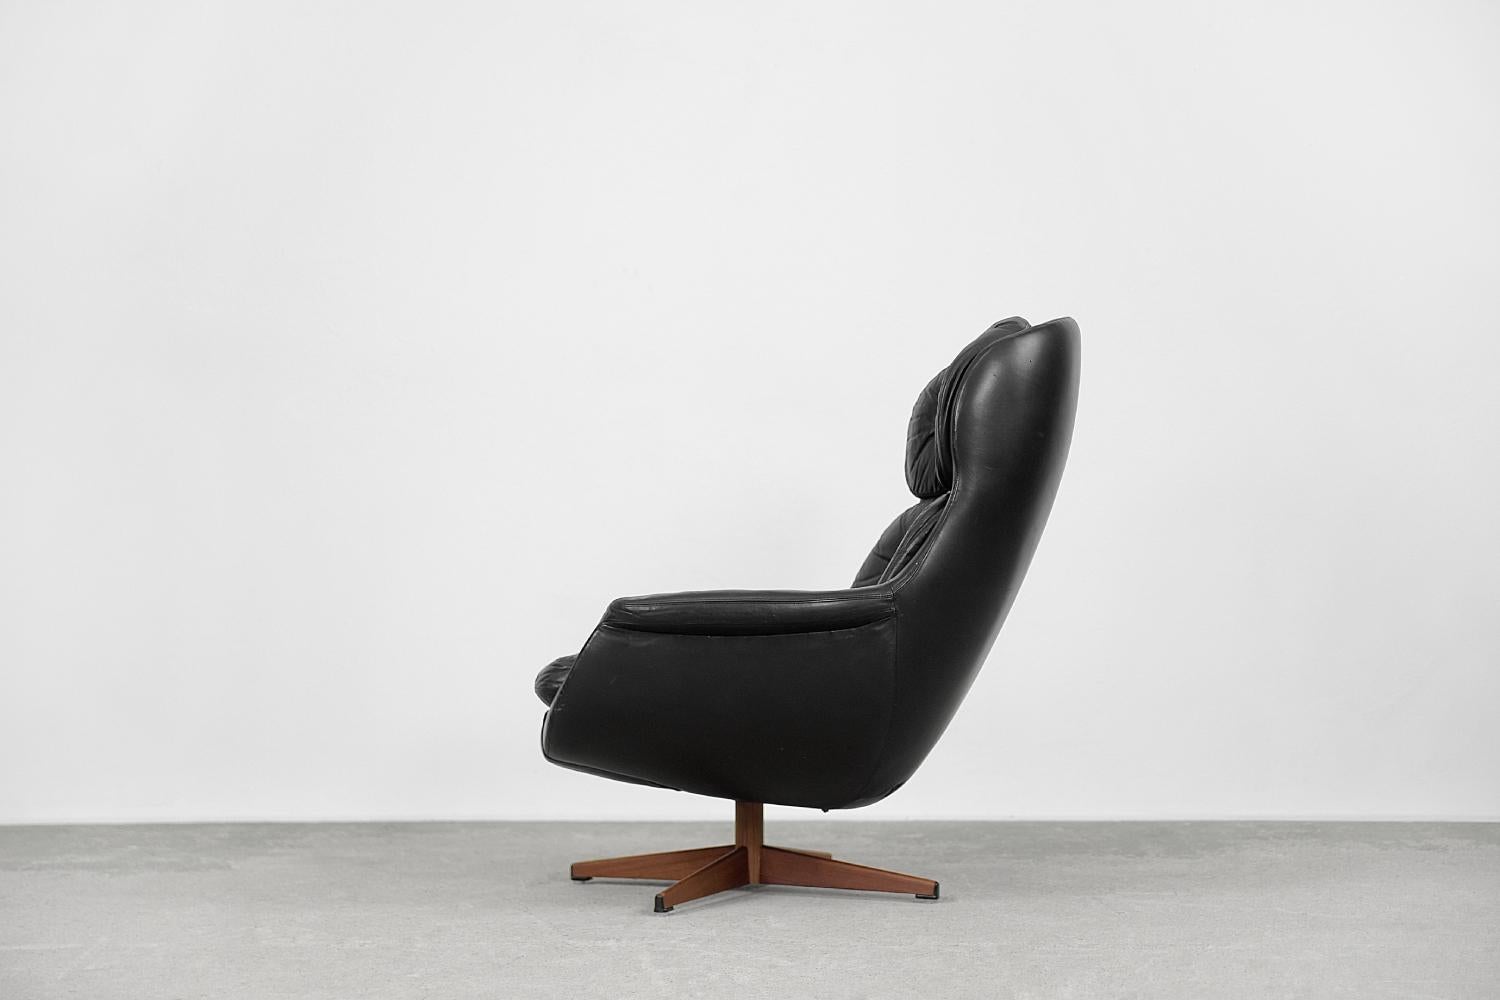 Metal Vintage Swedish Modernist Leather Swivel Lounge Chair from Selig Imperial, 1970s For Sale